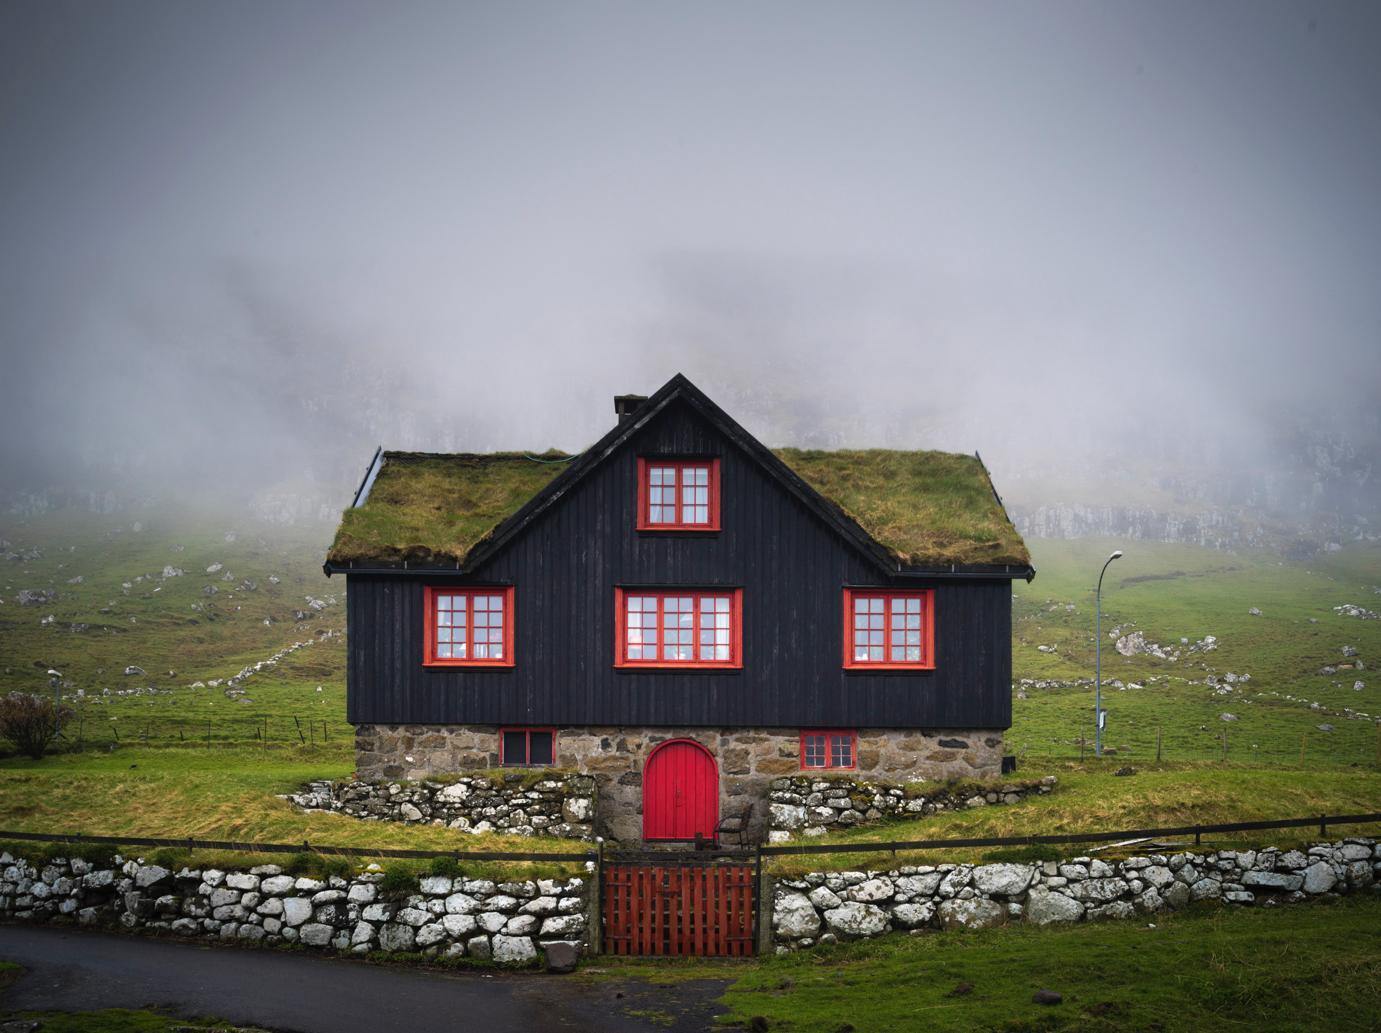 A beautiful house of black color with red outlines of windows, and a grassy roof, A greenfield area with nothing but a foggy effect in the background, Faroes Islands House 